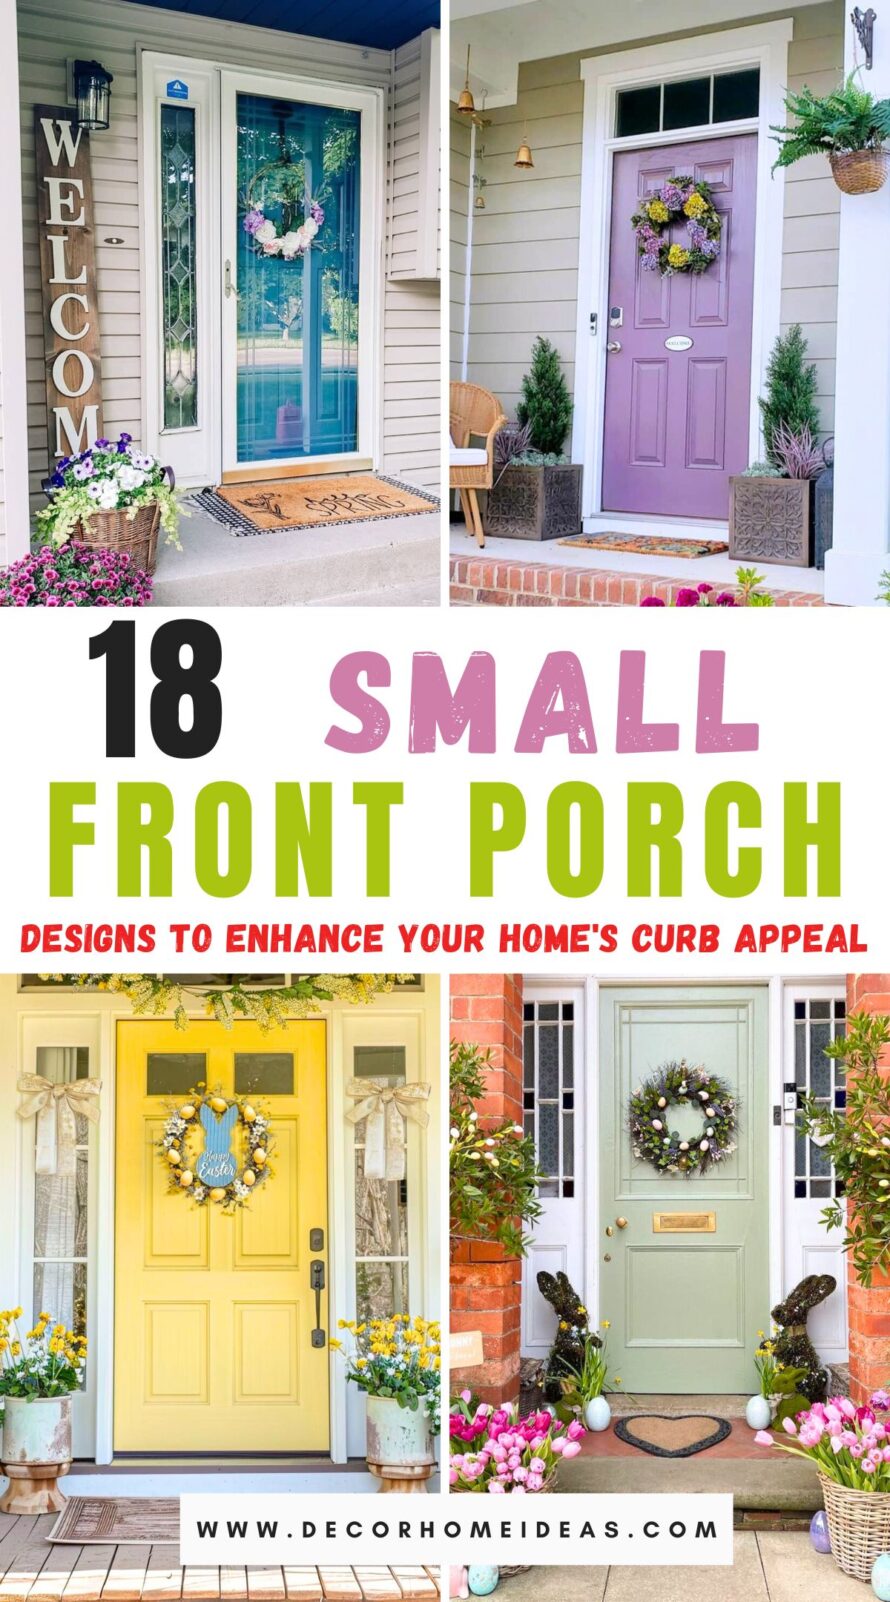 Discover 18 enchanting ways to transform your small front porch into a welcoming and stylish entryway. Perfect for maximizing curb appeal and space!